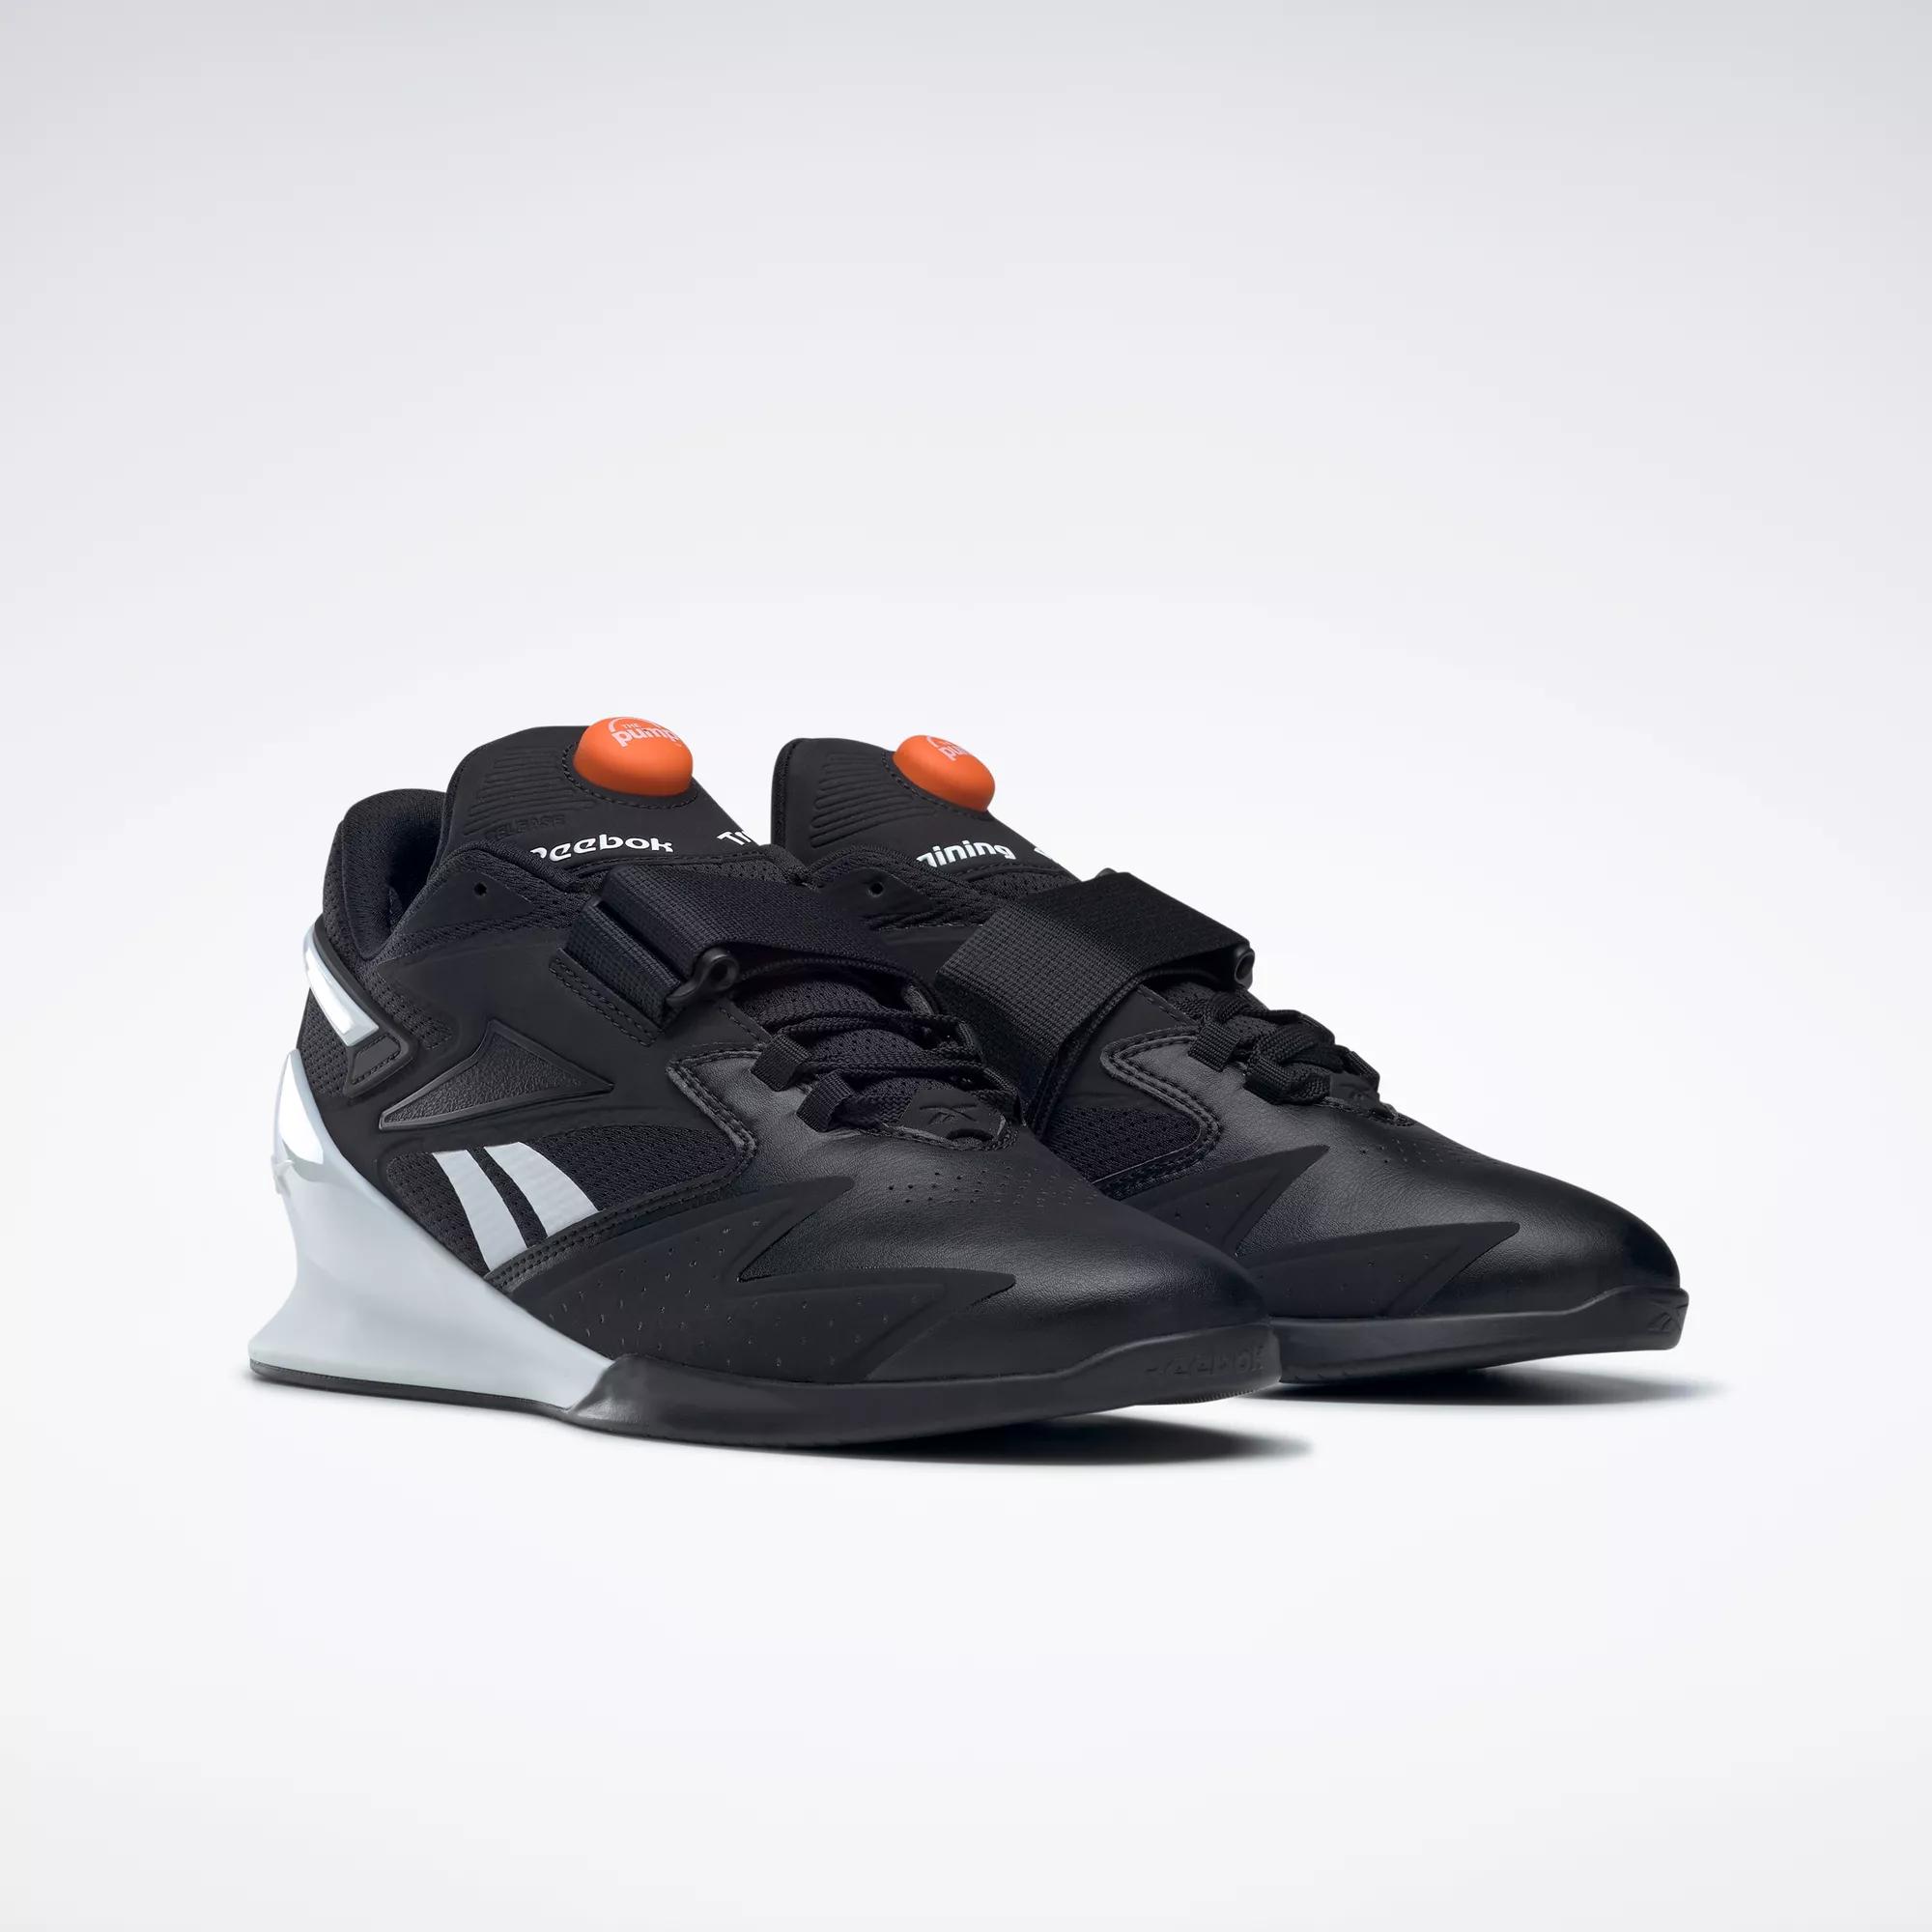 Legacy Lifter III Men's Weightlifting Shoes - Core Black / Ftwr White /  Smash Orange S23-R